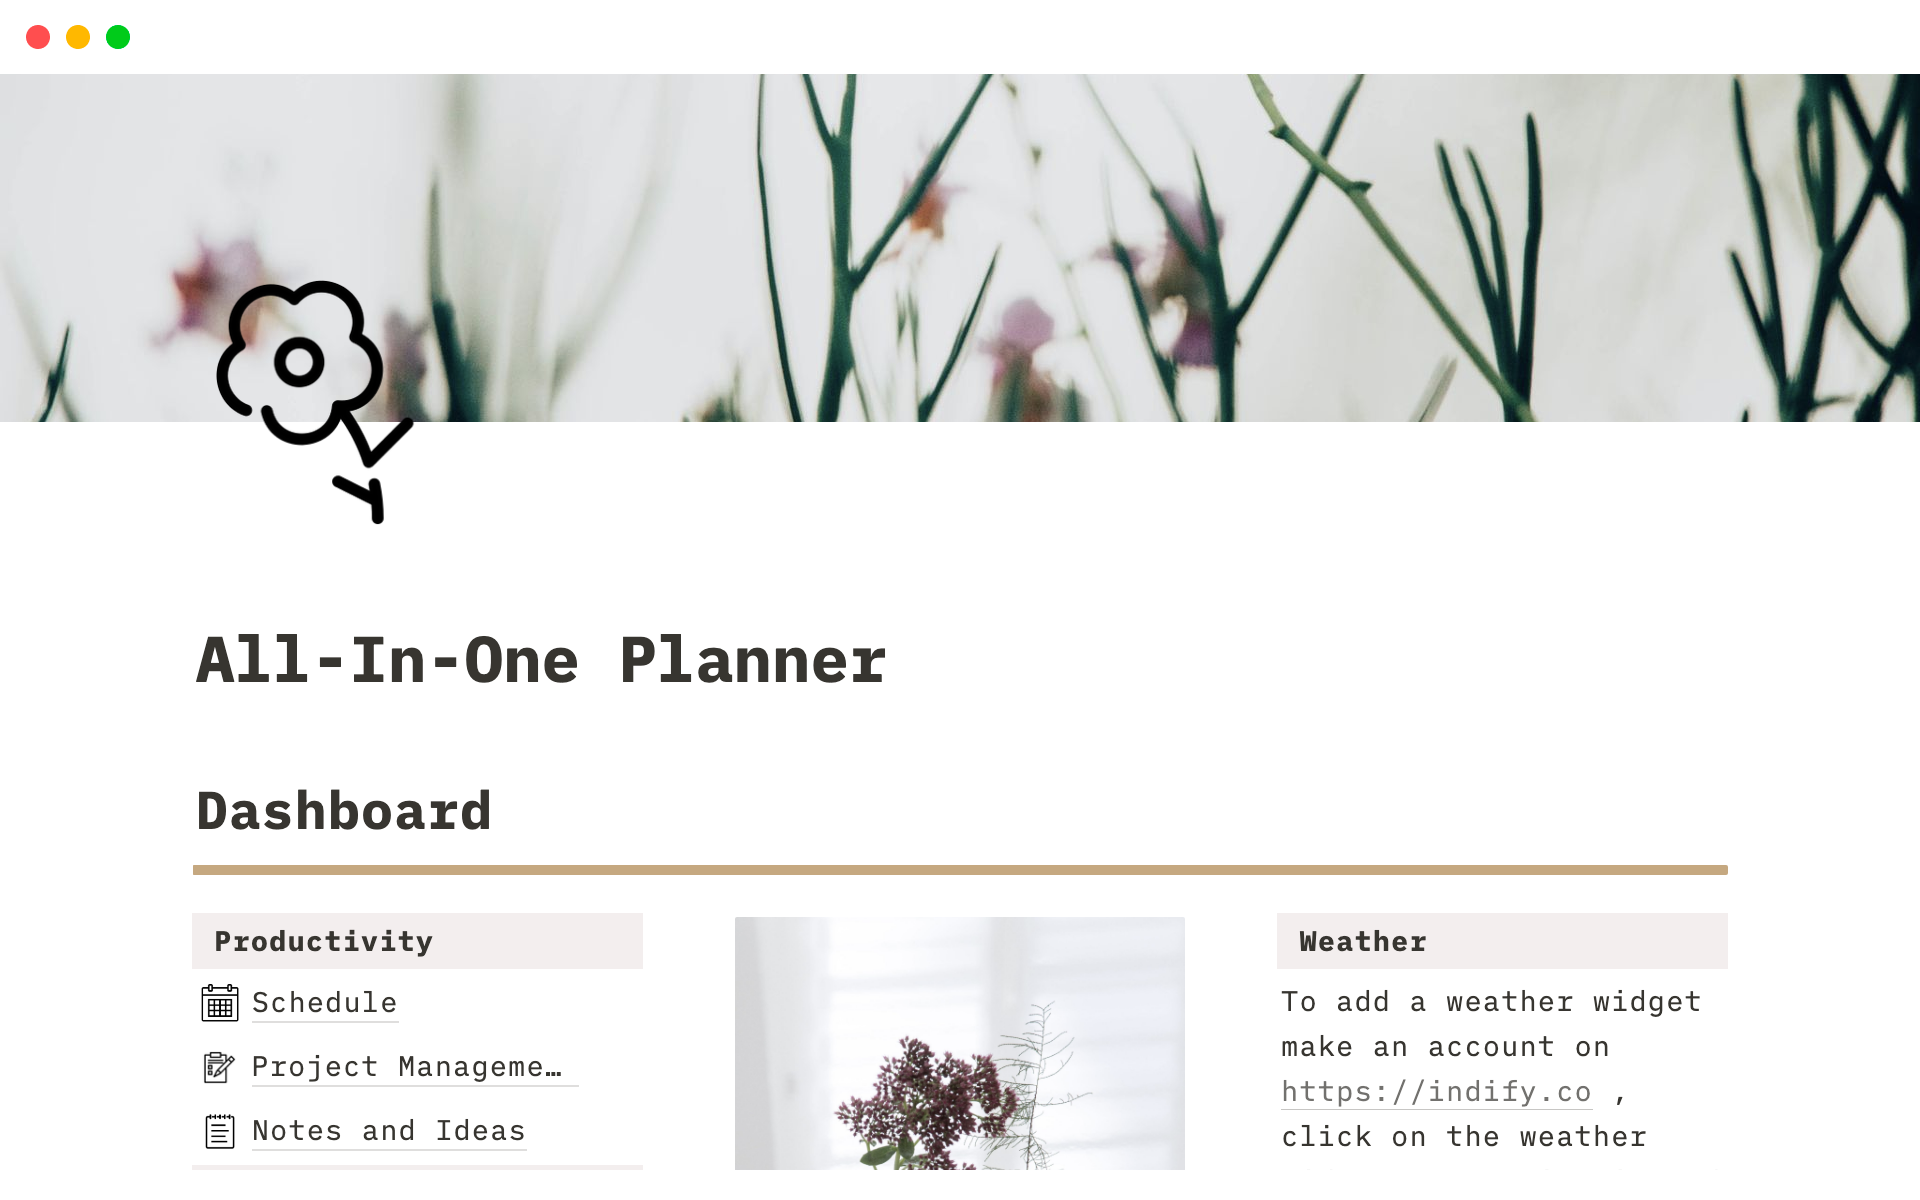 This notion planner has everything you'll need to organize your life!